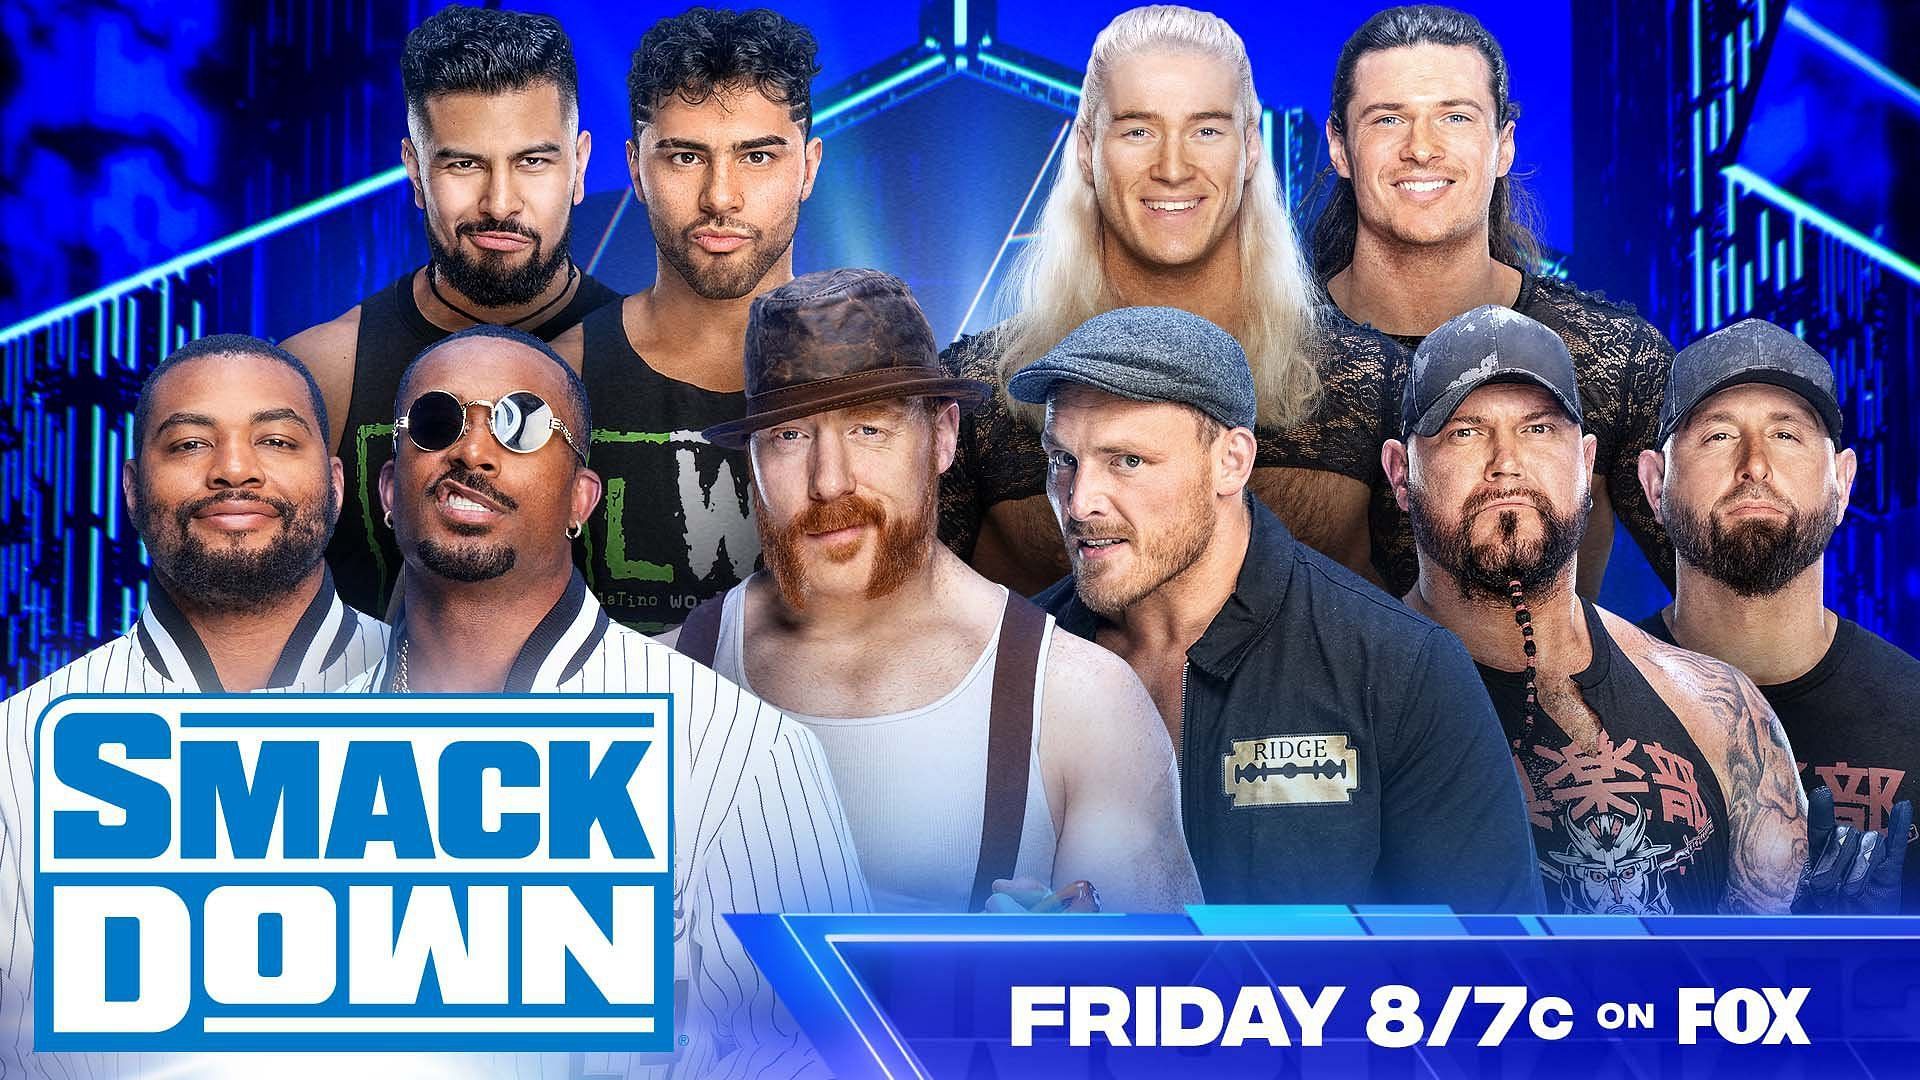 A big-time Gauntlet Match is set to take place on WWE SmackDown